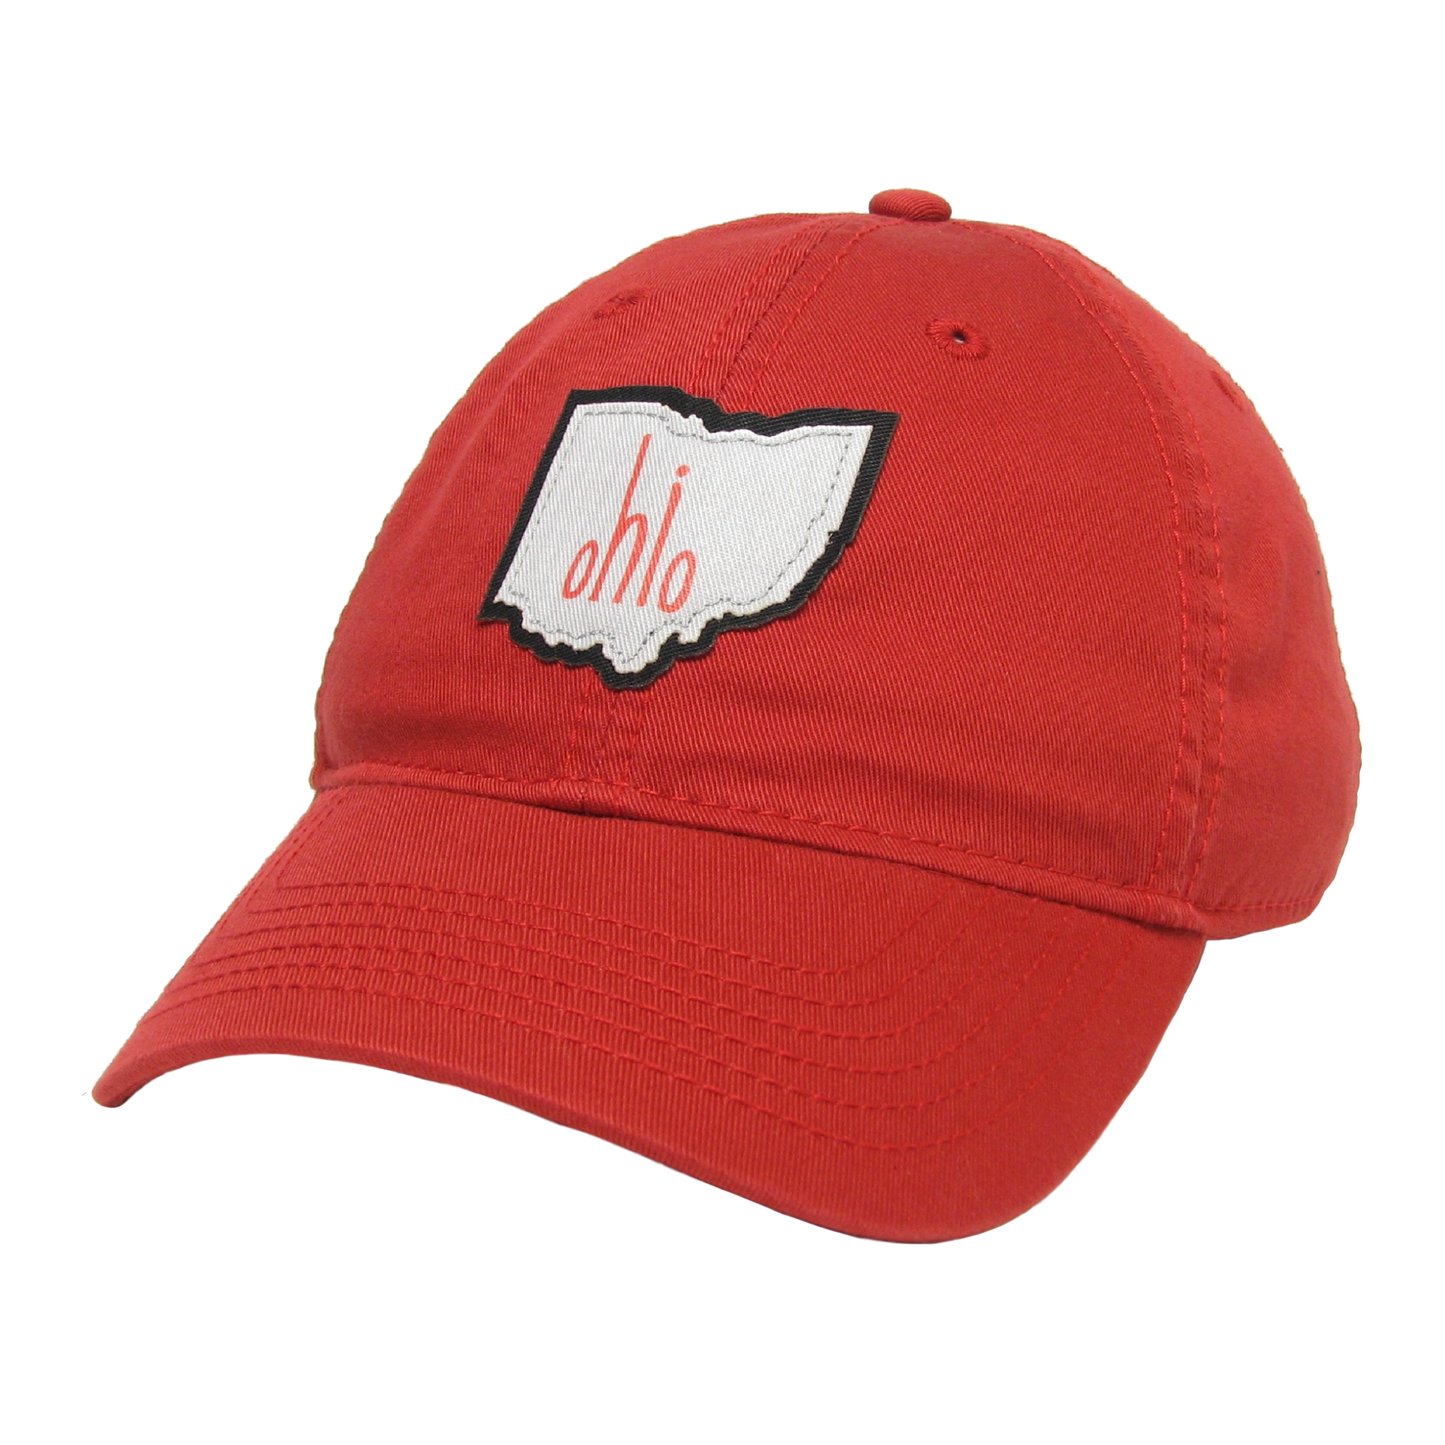 Ohio Relax Twill Hat in Scarlet